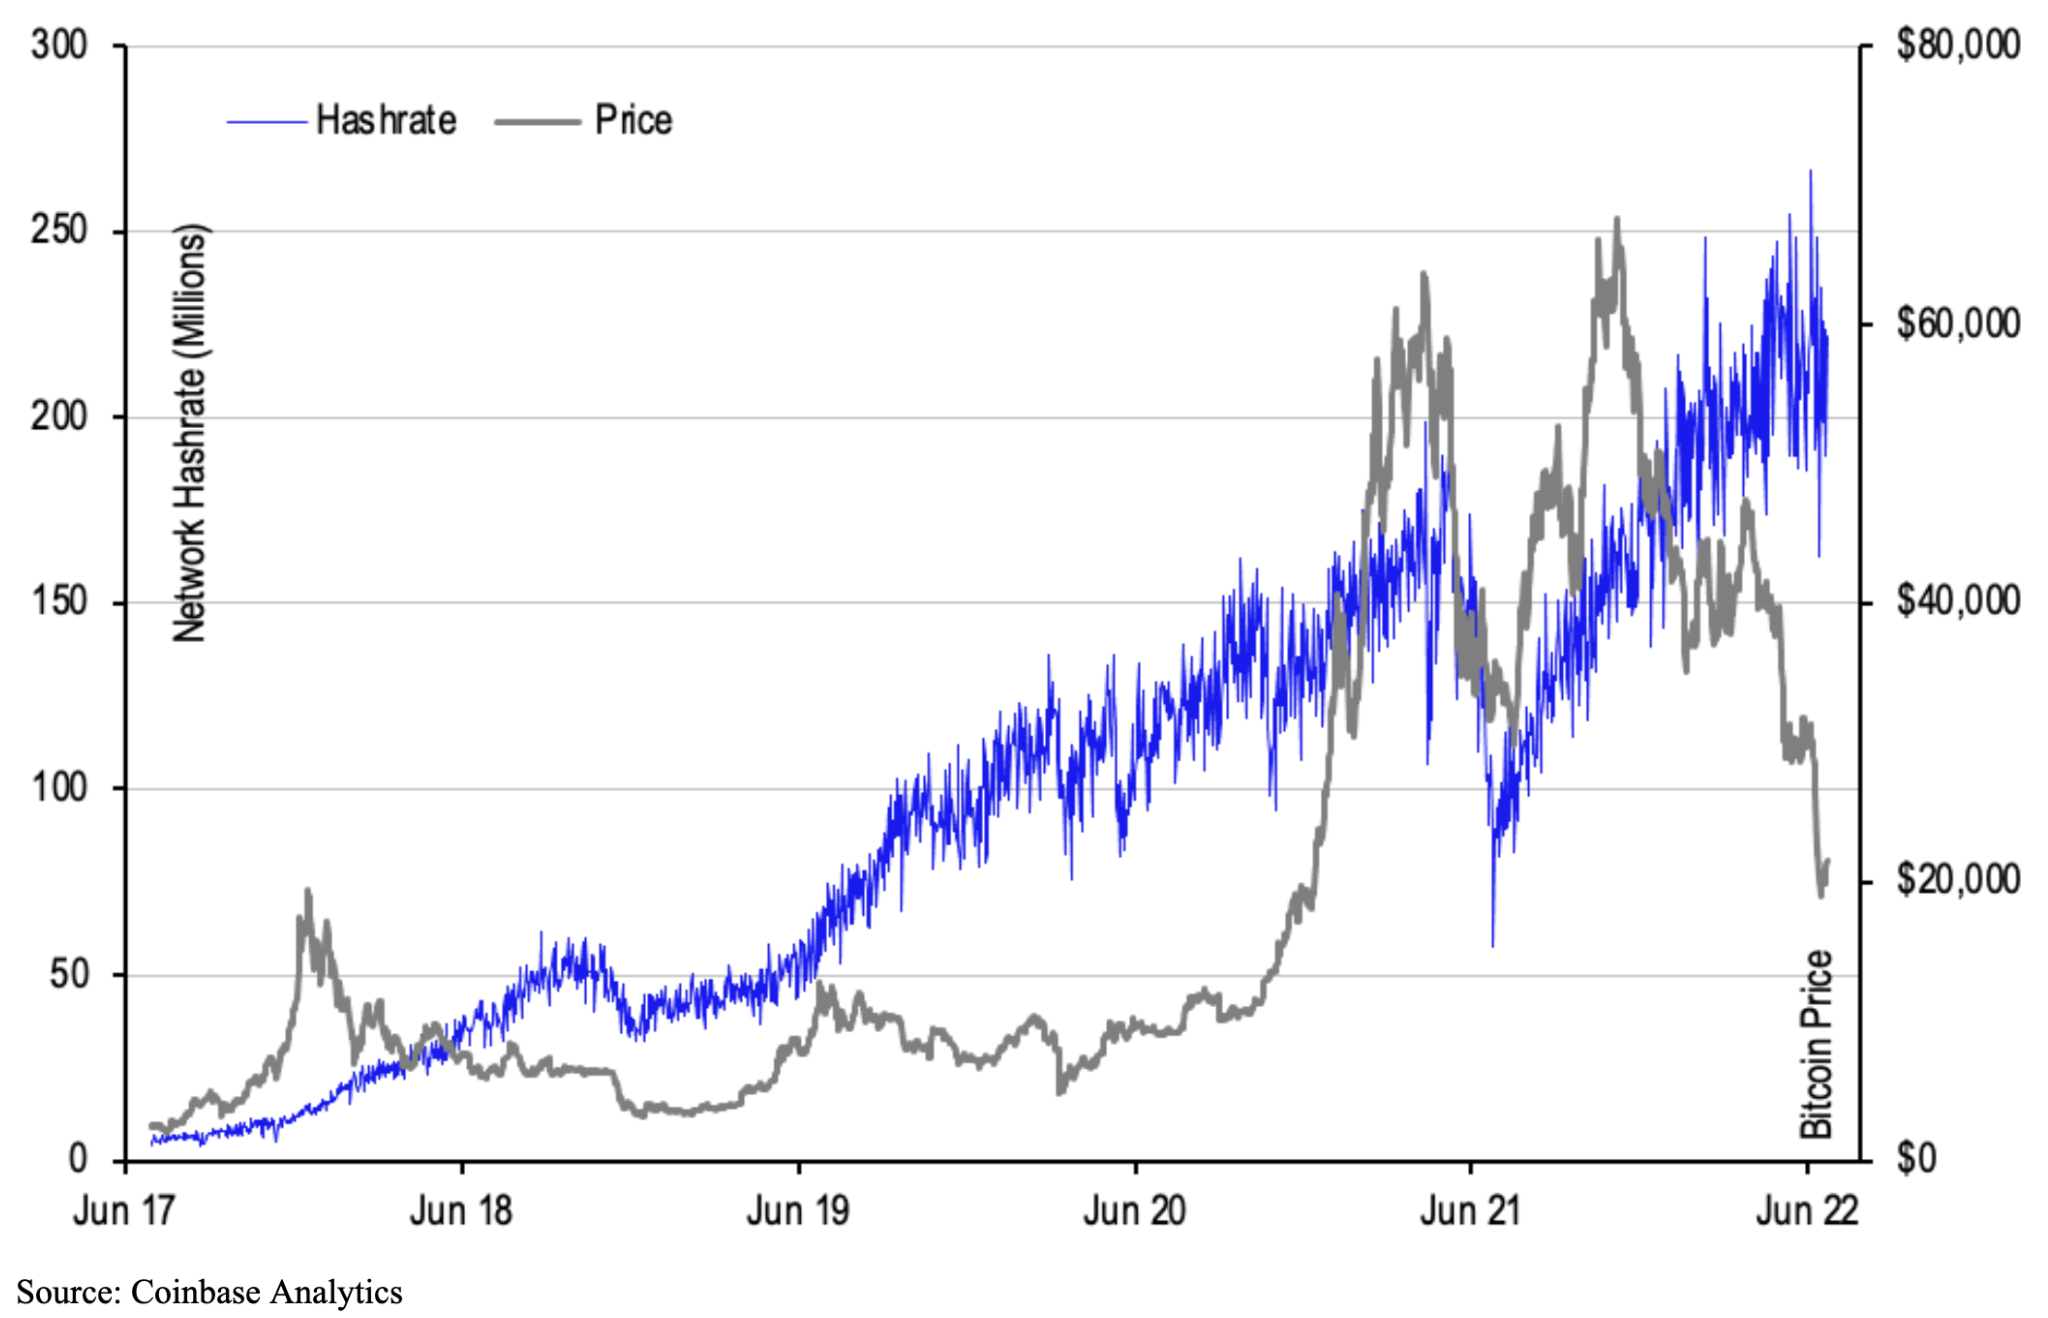 Chart 4. Bitcoin price and hashrate over time